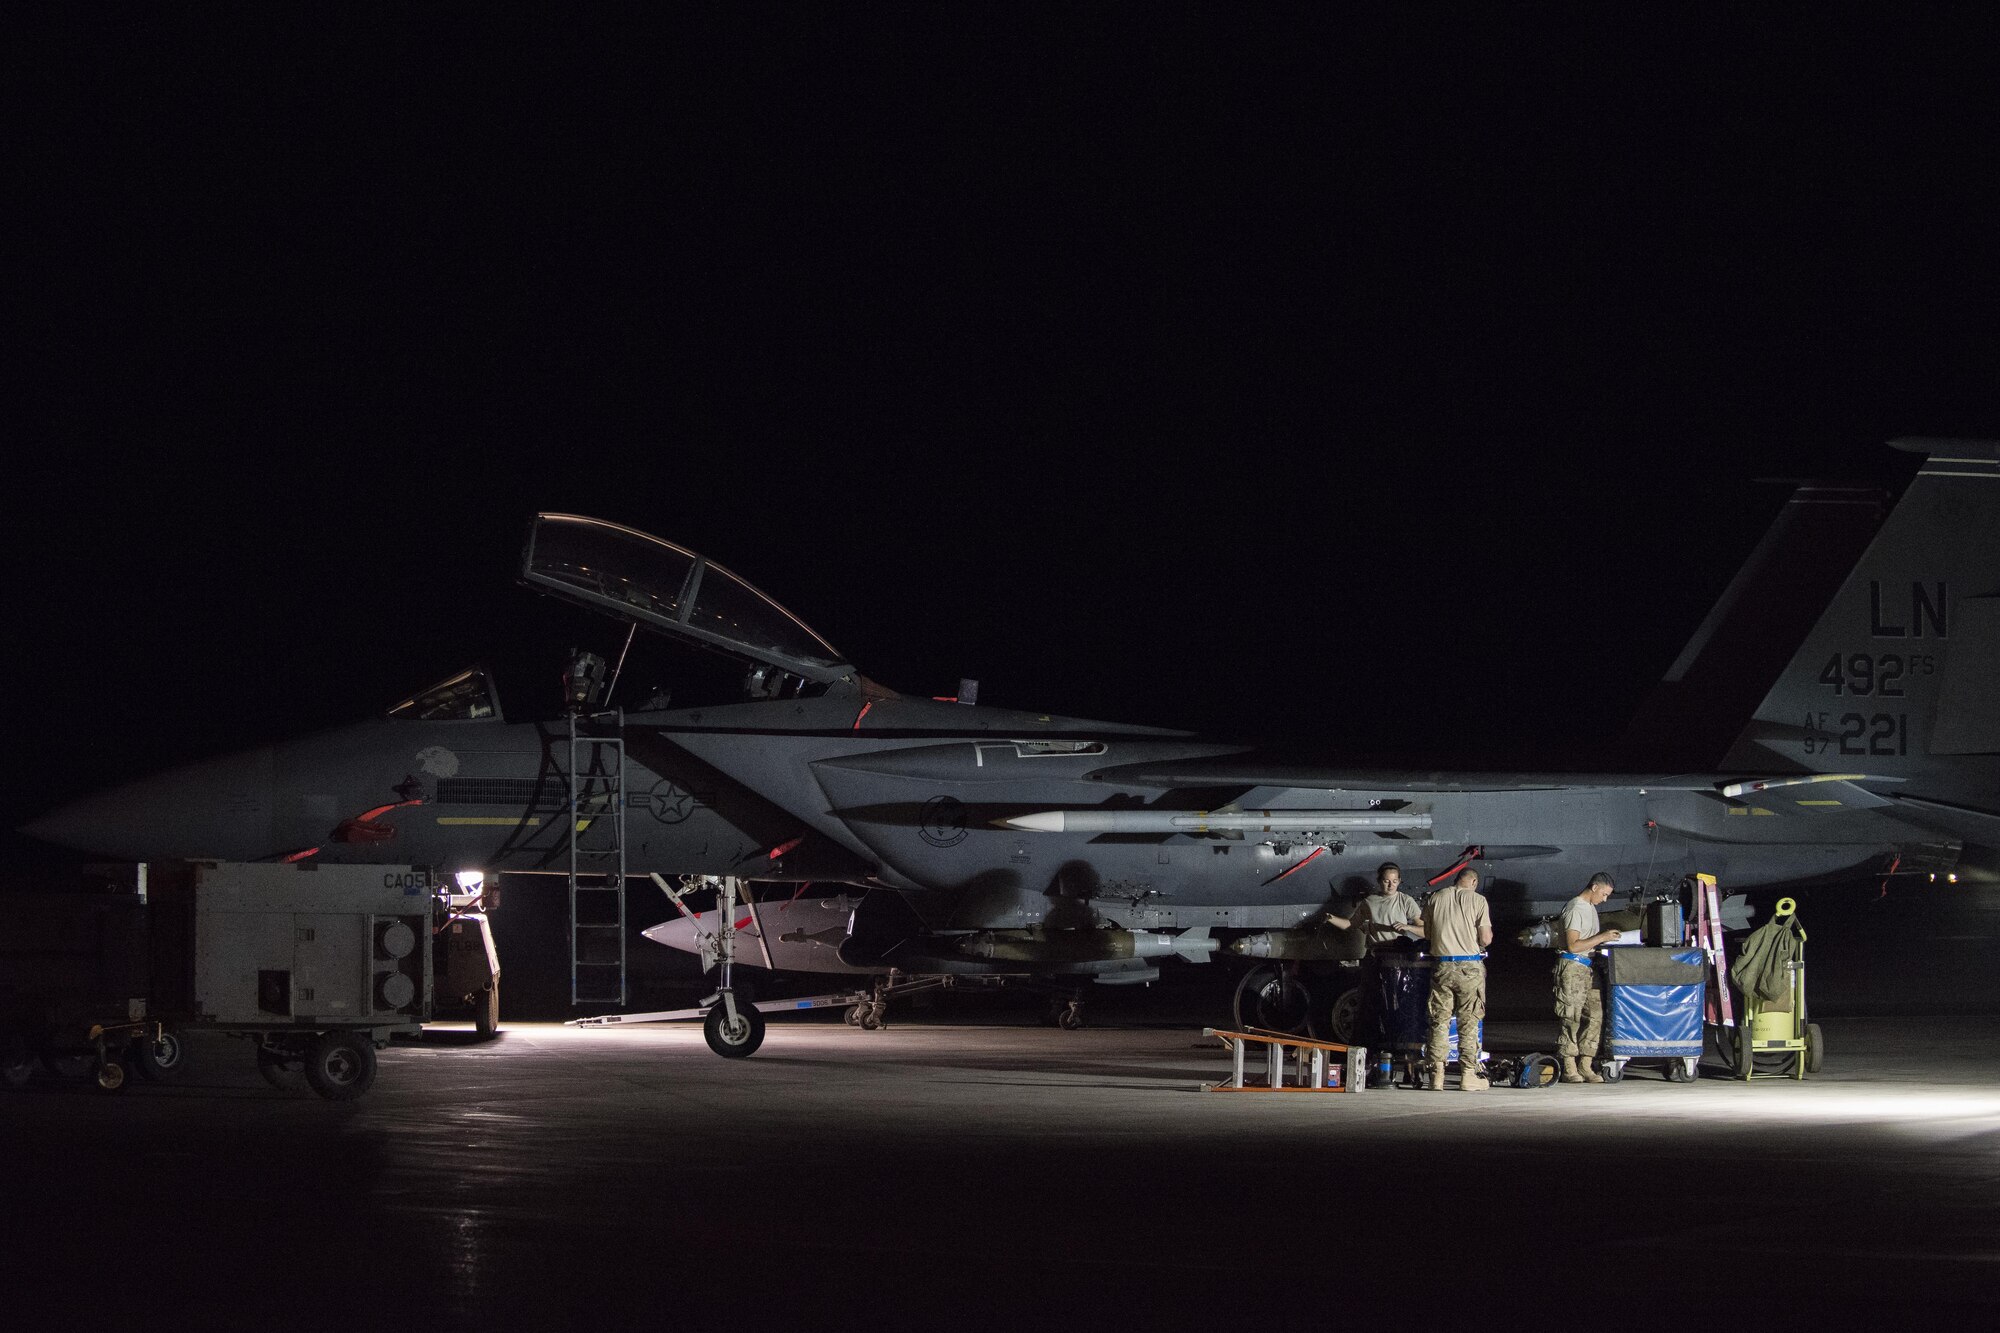 Airmen from the 332nd Expeditionary Maintenance Squadron weapons flight, finish loading munitions on an F-15E Strike Eagle, August 12, 2017, in Southwest Asia. The weapons flight works around the clock to ensure bombs and missiles are loaded onto F-15E Strike Eagles and that the weapons systems function properly. (U.S. Air Force photo/Senior Airman Damon Kasberg)